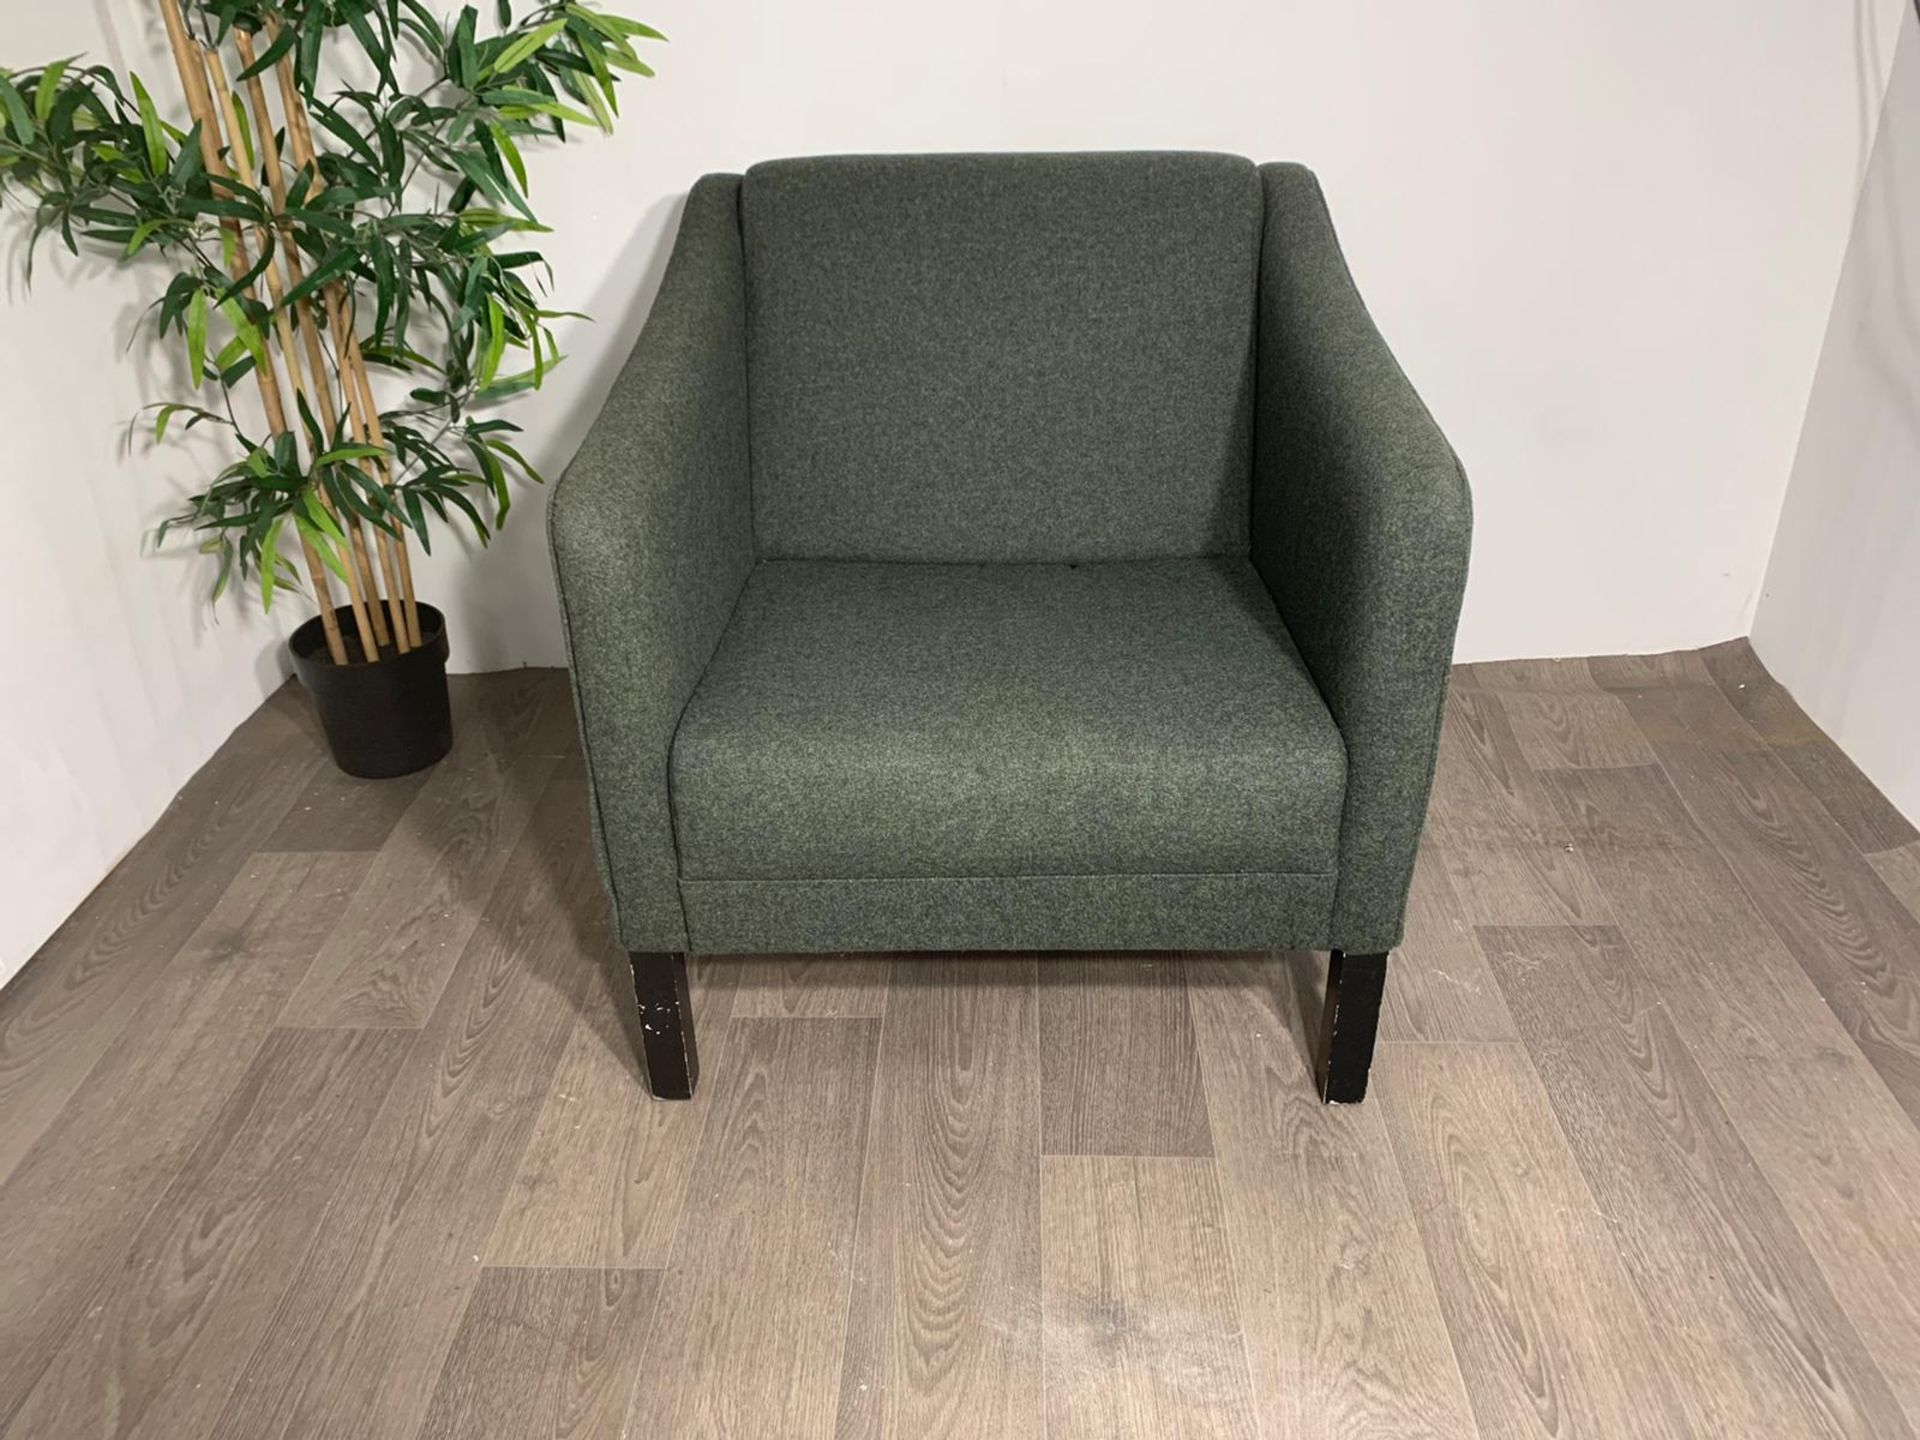 Green Commercial Grade Lounge Chair - Image 3 of 6